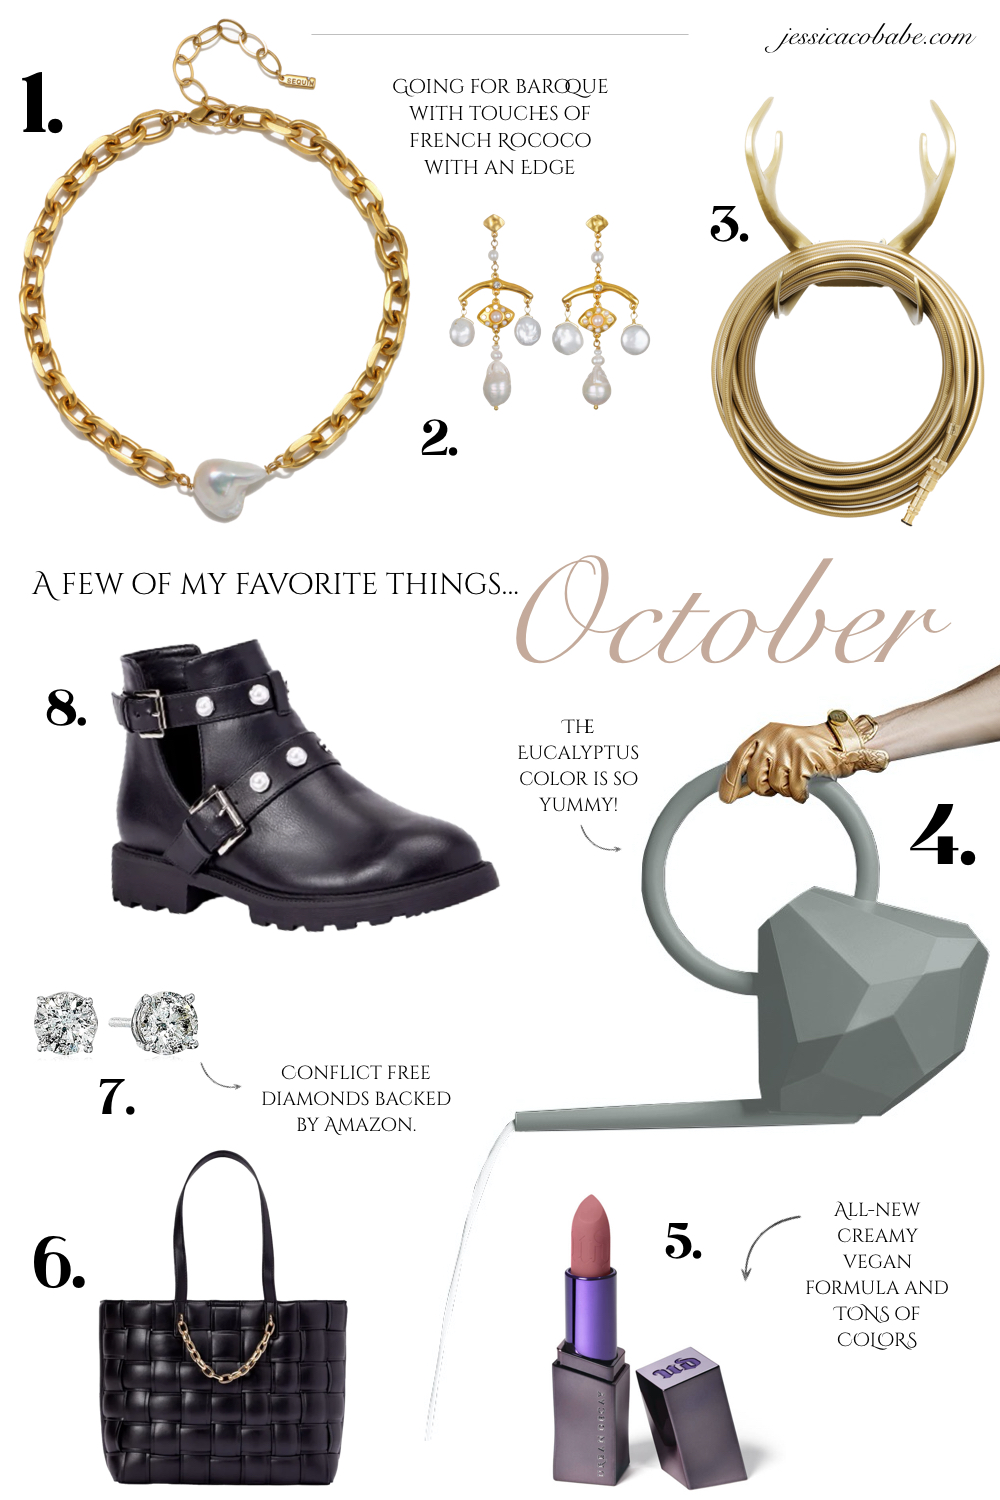 October Favorites Roundup By Fashion Editor and Blogger Jessica Cobabe